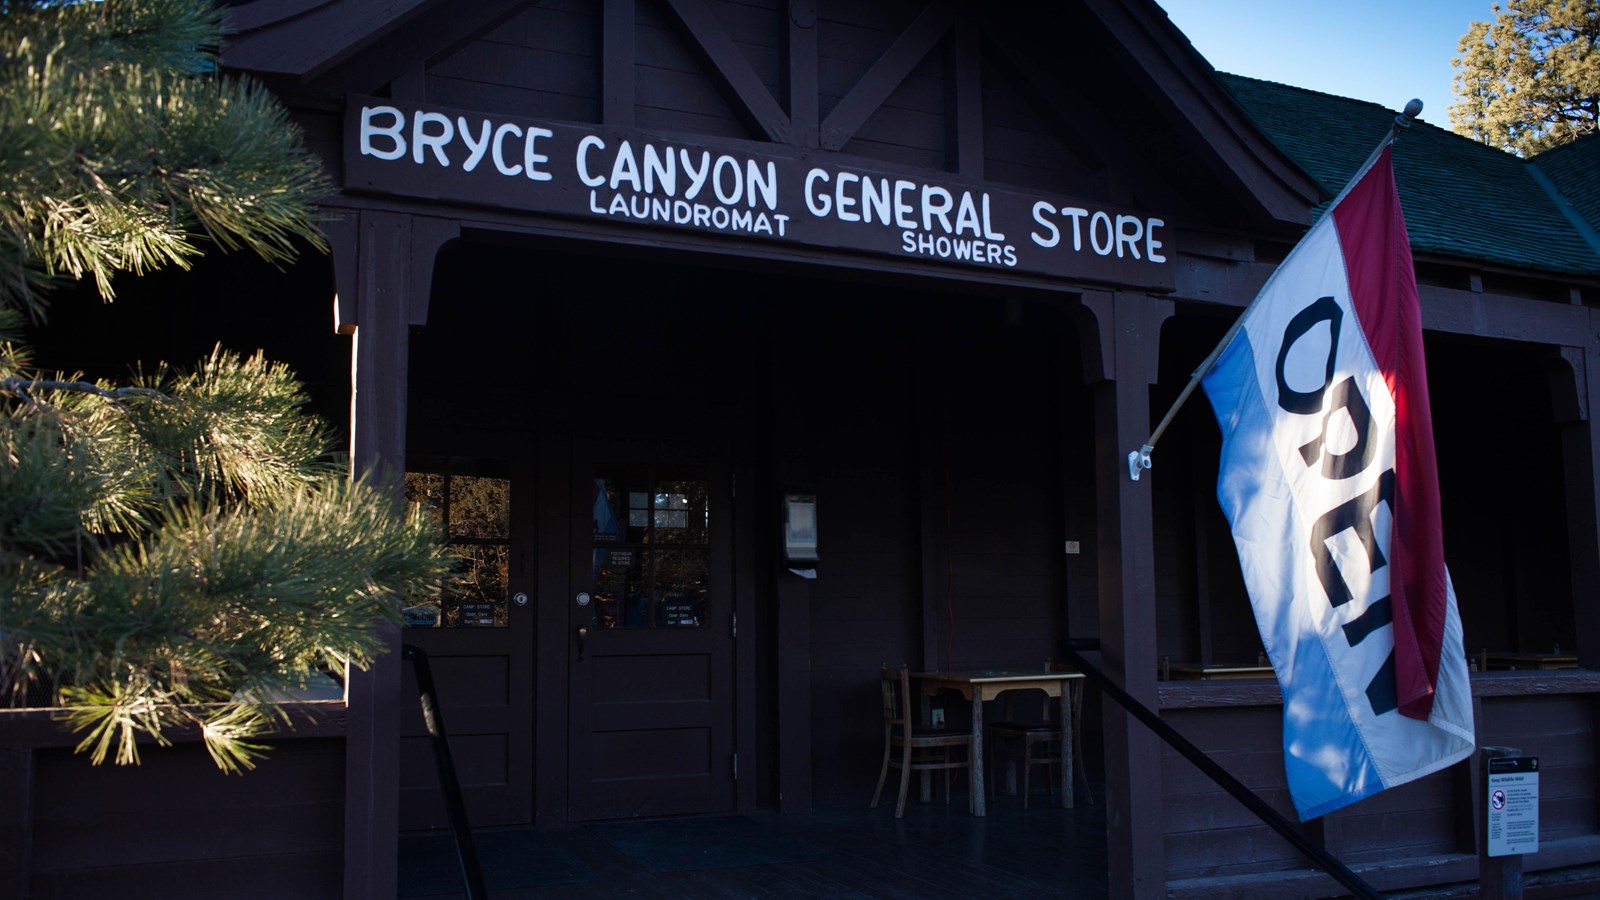 A brown wood porch with large Open flag; sign reads Bryce Canyon General Store Laundromat Showers